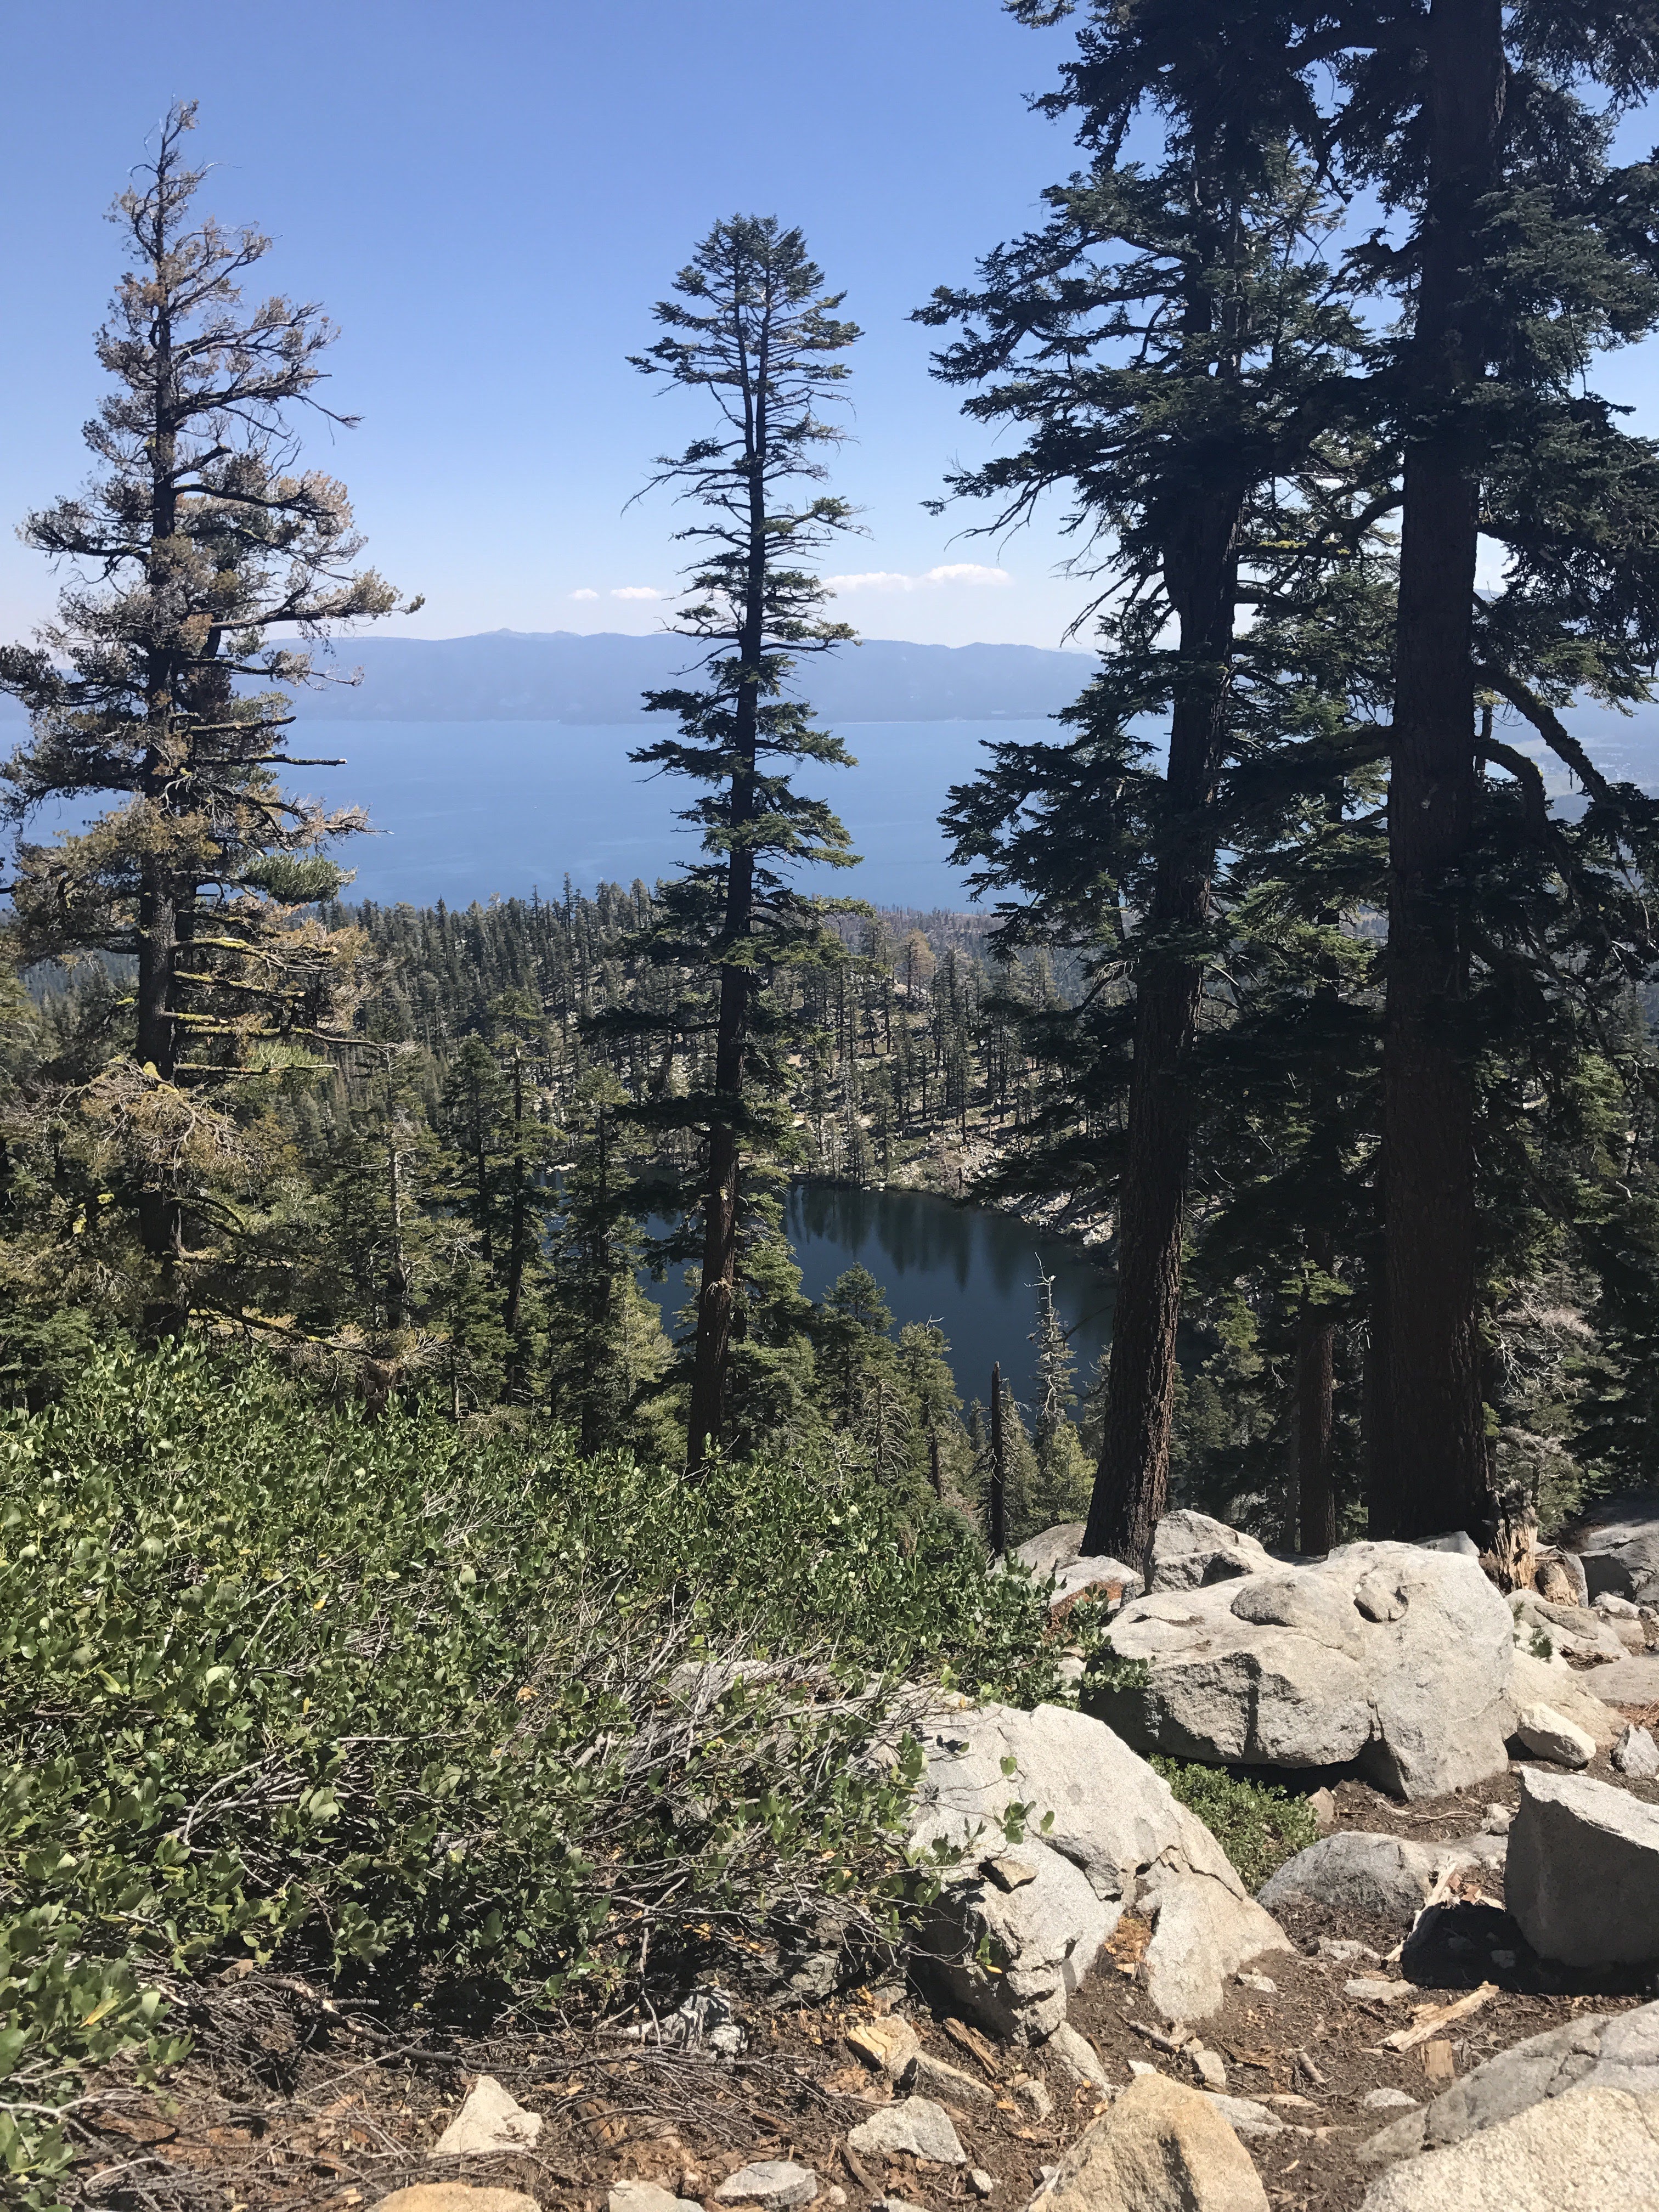 Another view of Granite Lake below, and Lake Tahoe in the distance. 8/24/2017